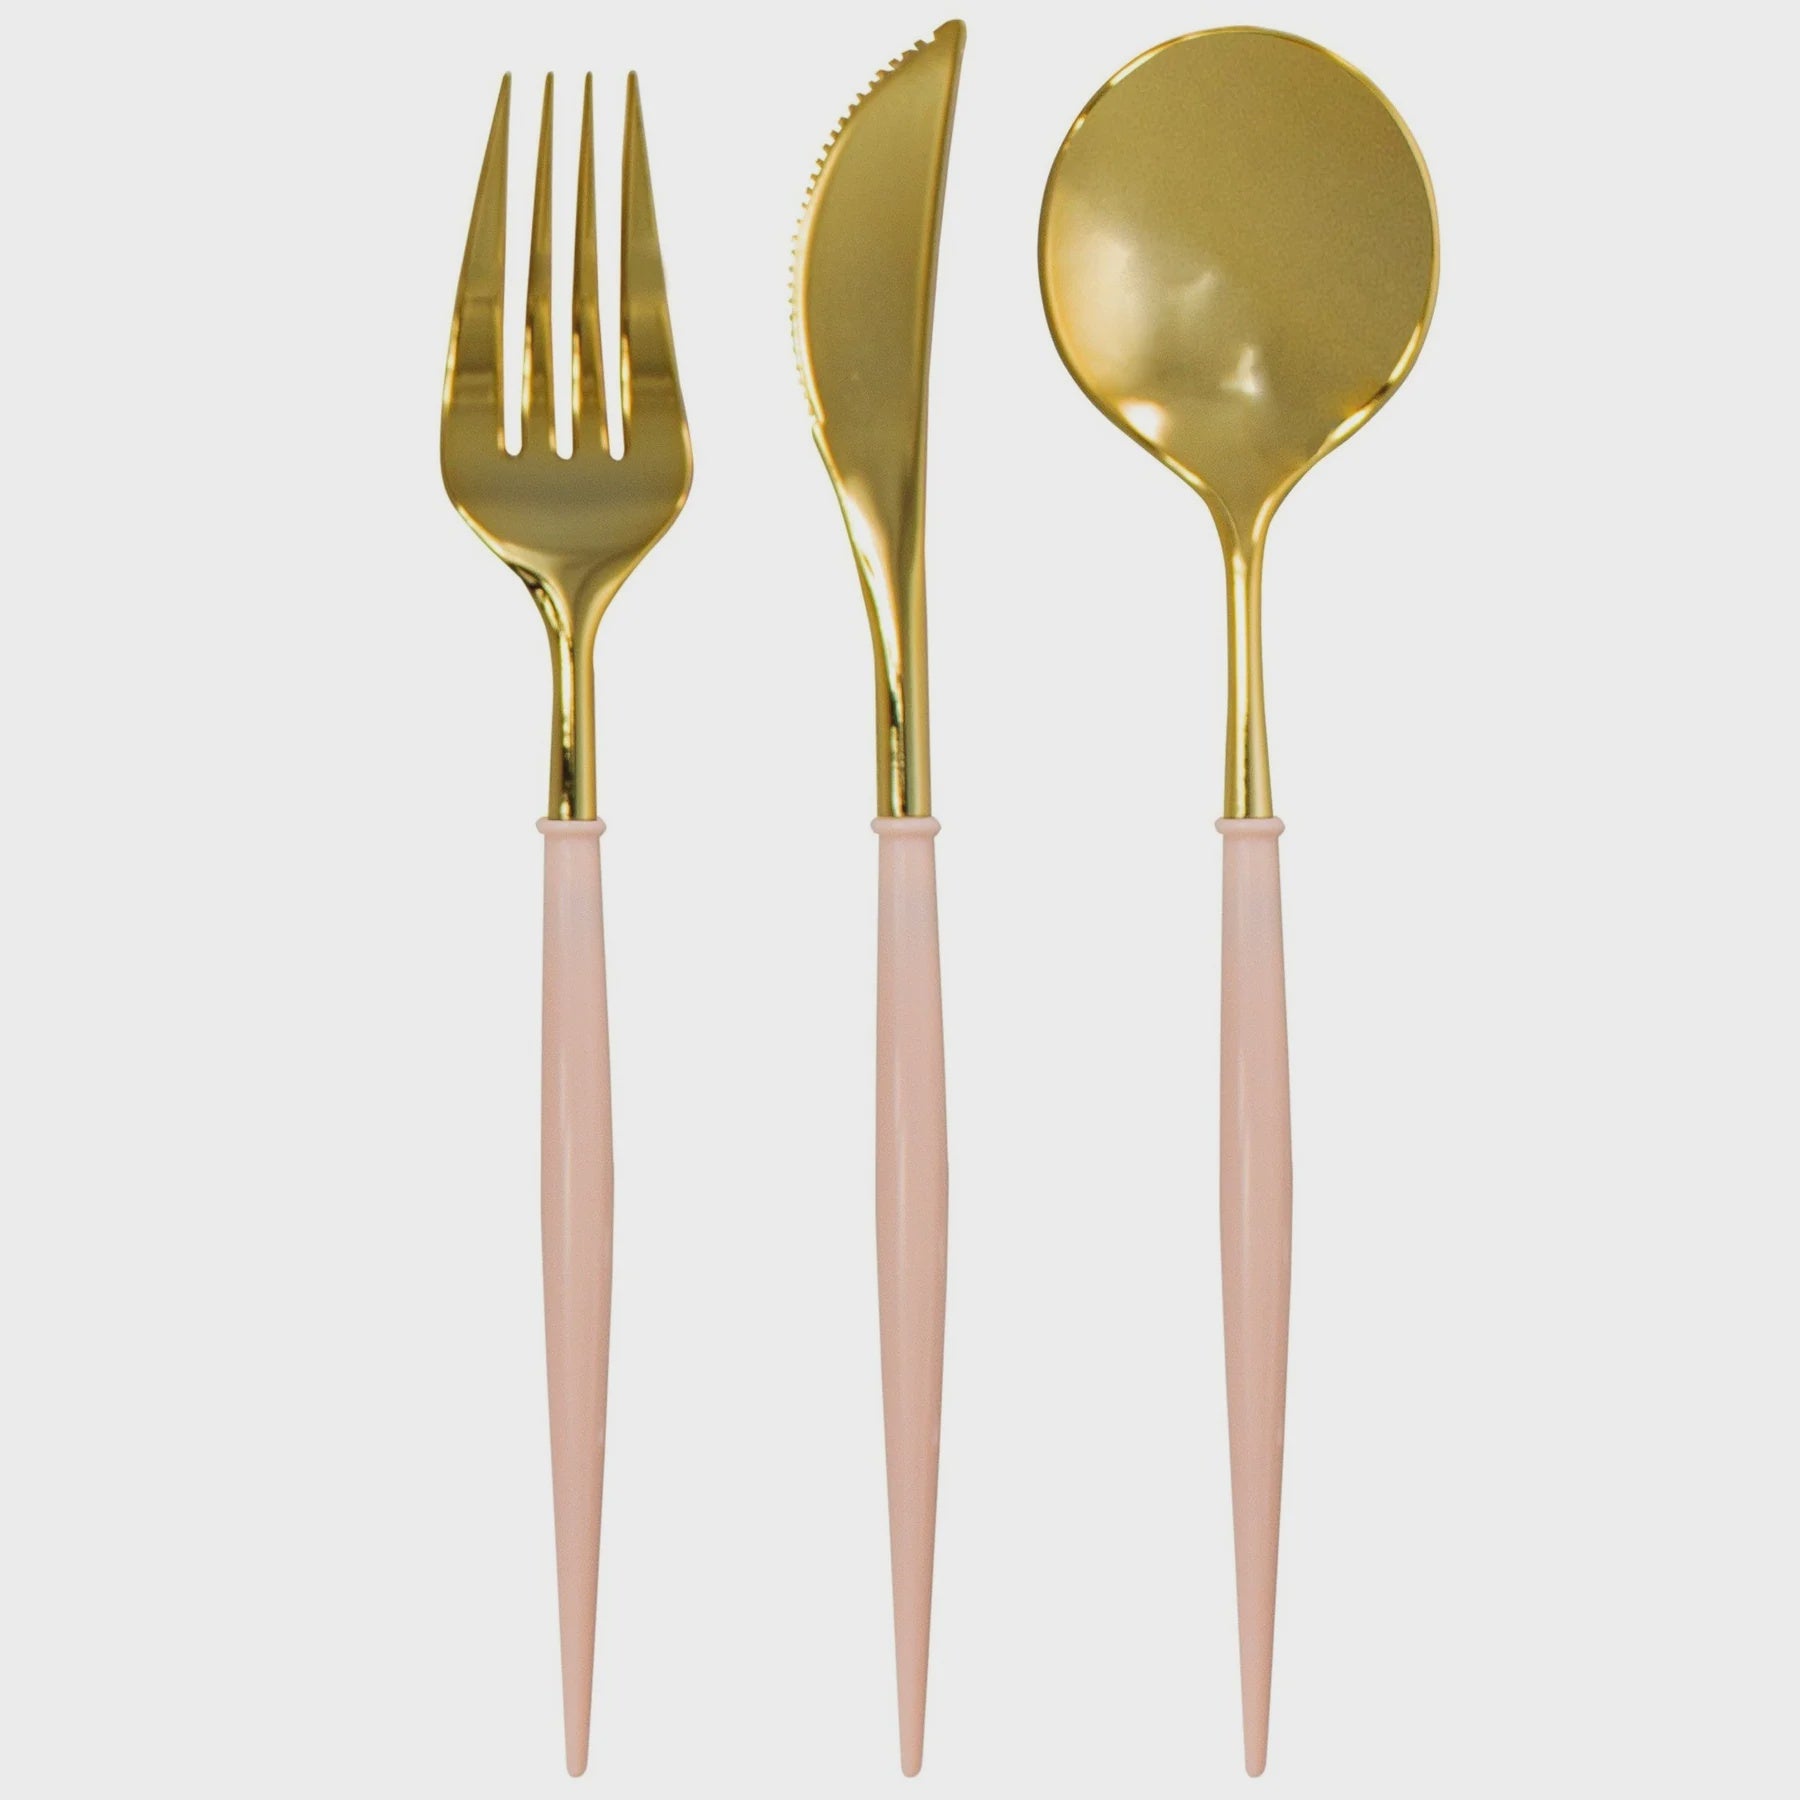 Bella Plastic Cutlery in Gold and Pink: a sleek set of disposable spoon, fork, and knife, perfect for elevating any event or table setting.